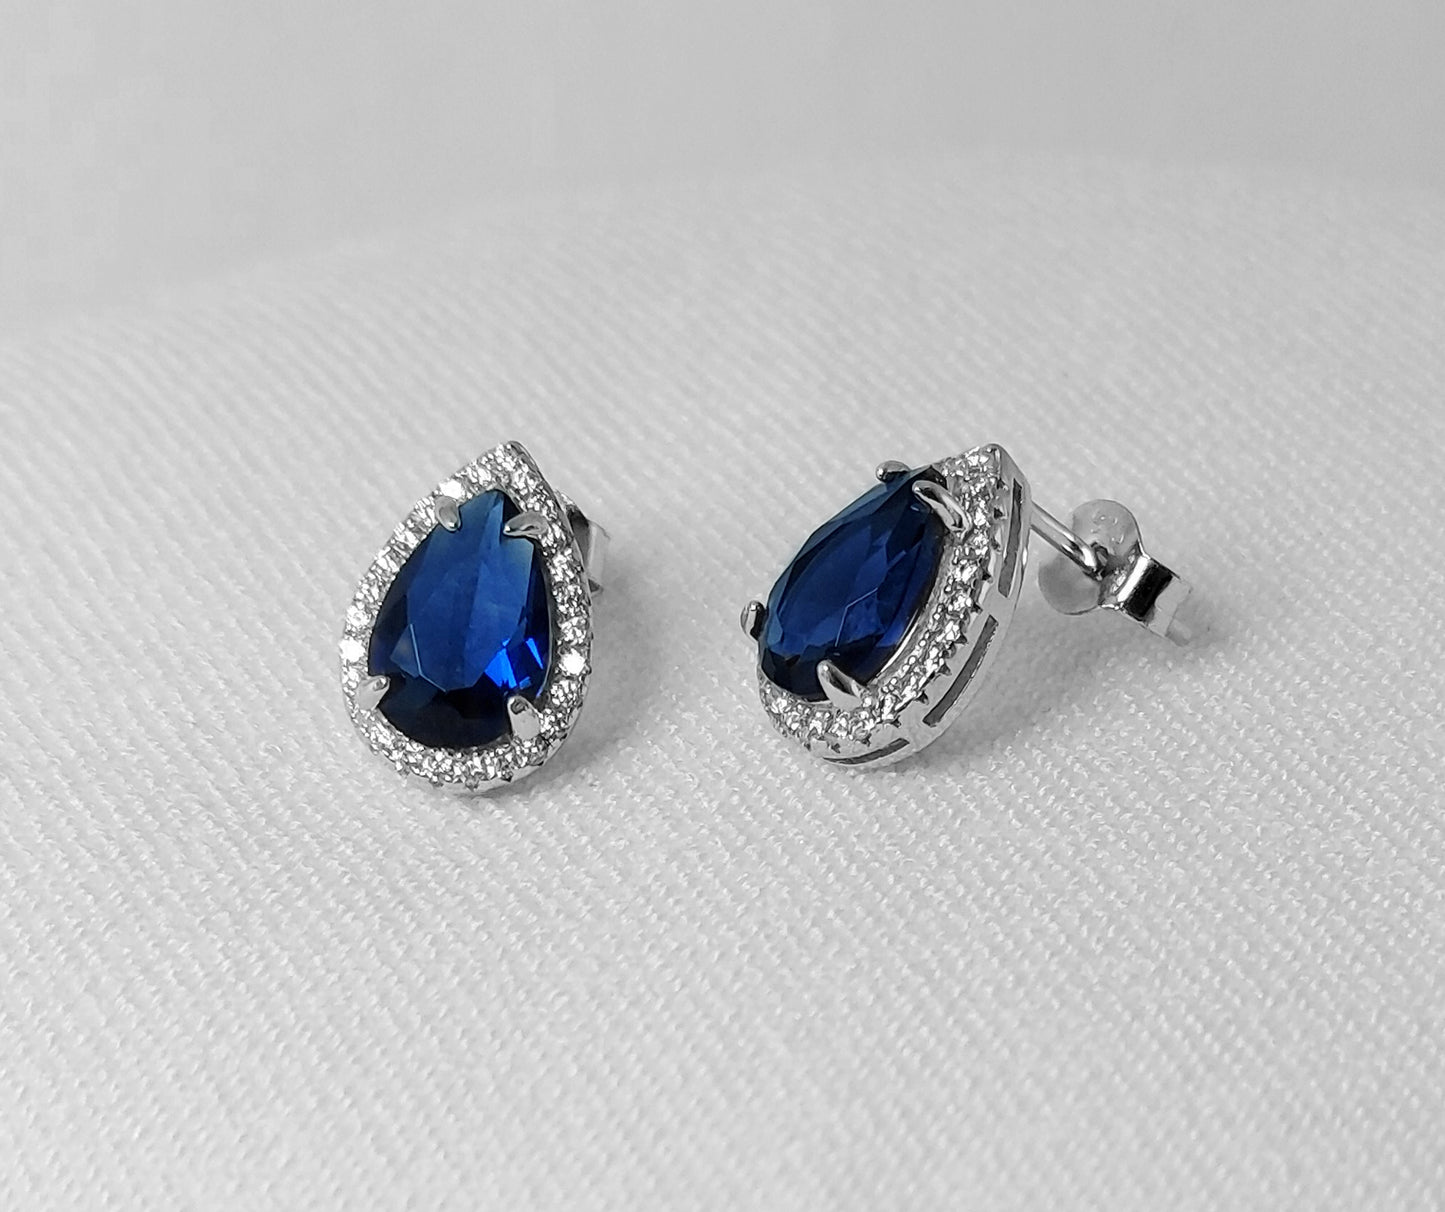 Sterling Silver Earrings with a Deep Blue Cubic Zirconia